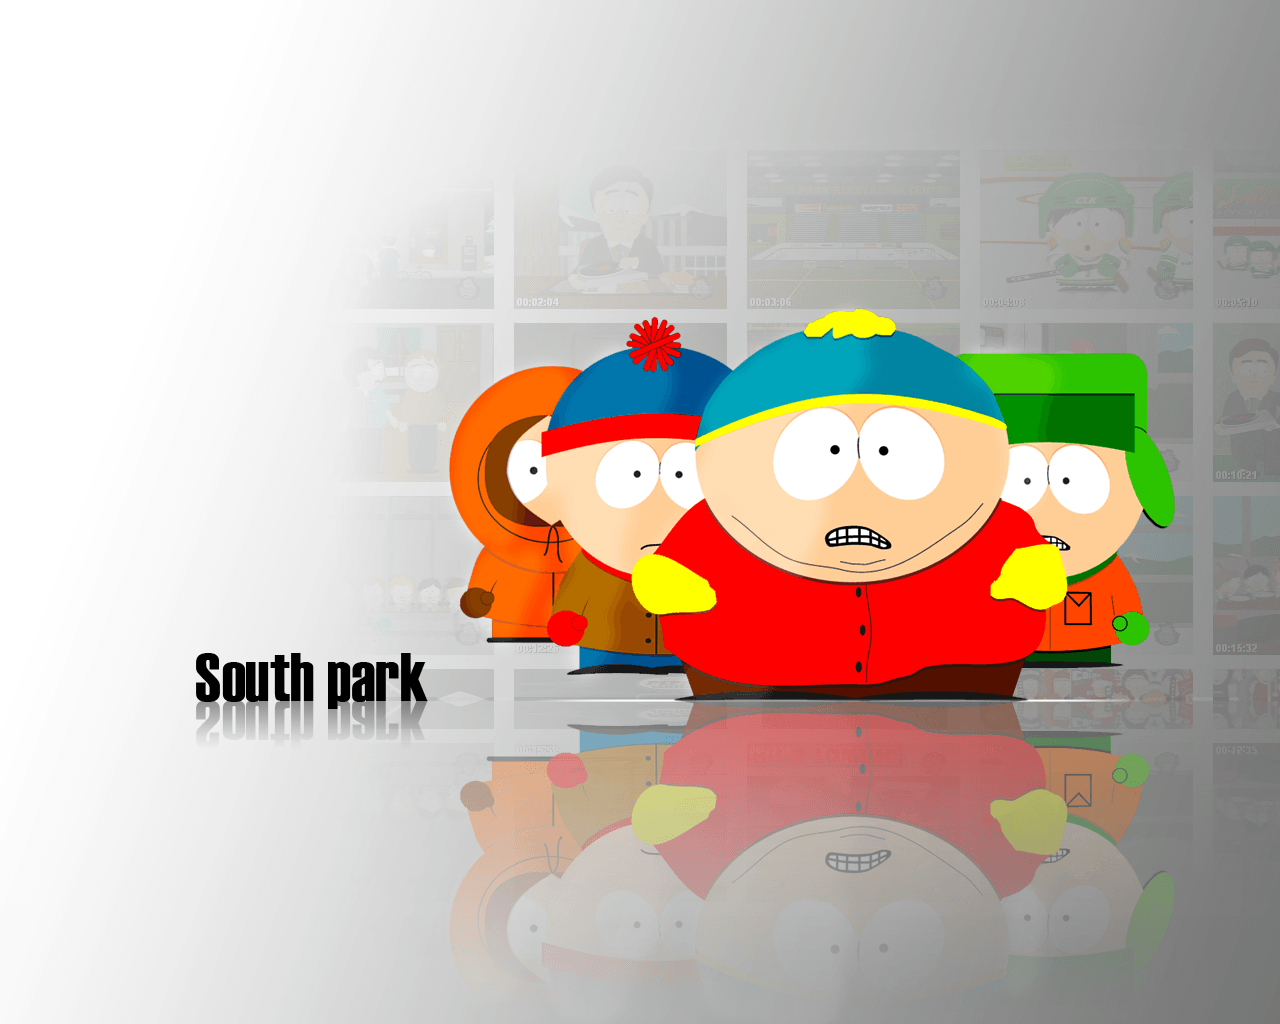 Related Picture South Park Black Background 1920x1080 Wallpaper